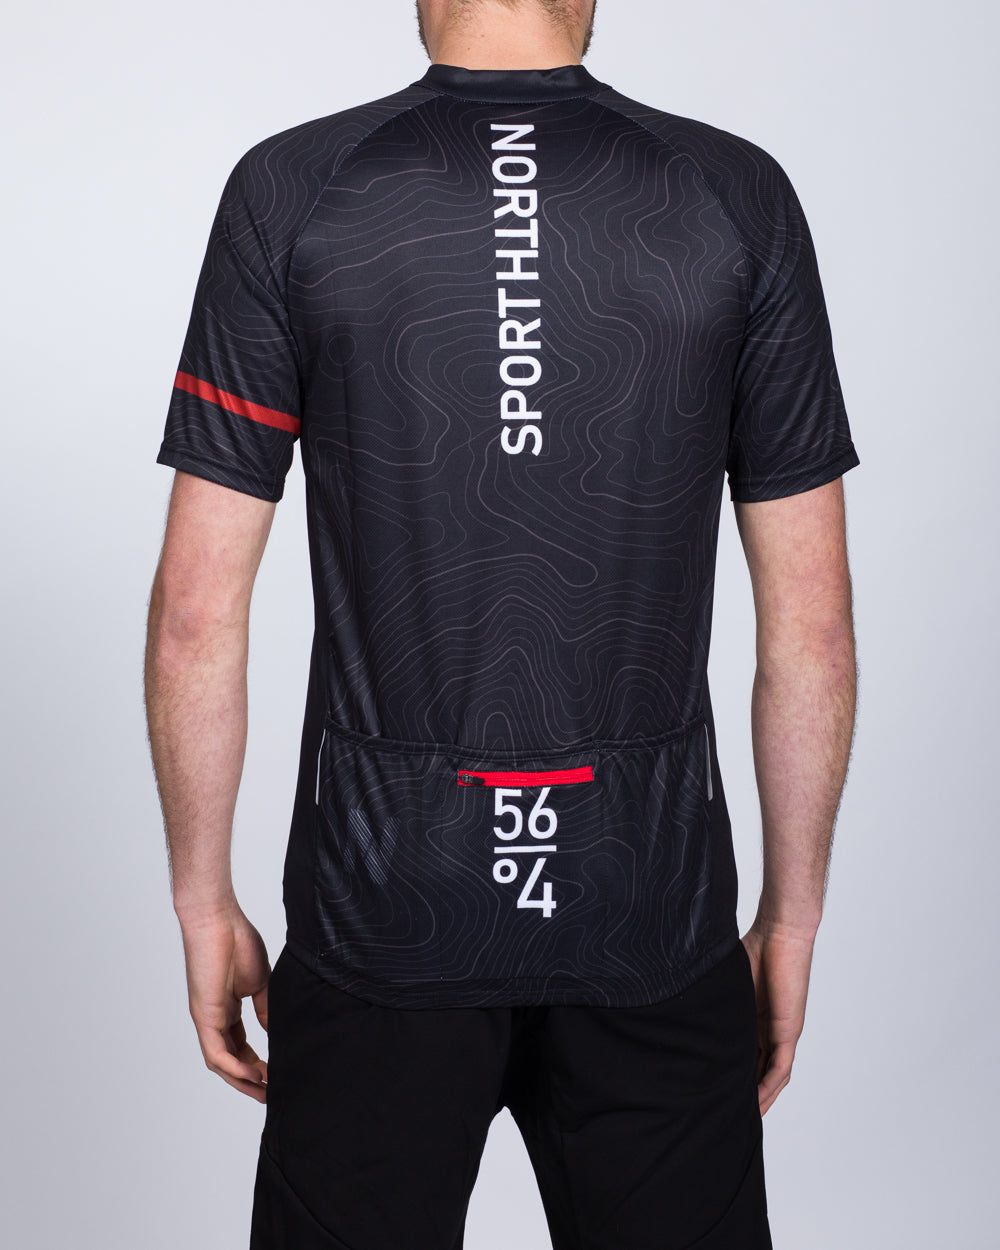 North 56 Tall Cycling Top (black/red)